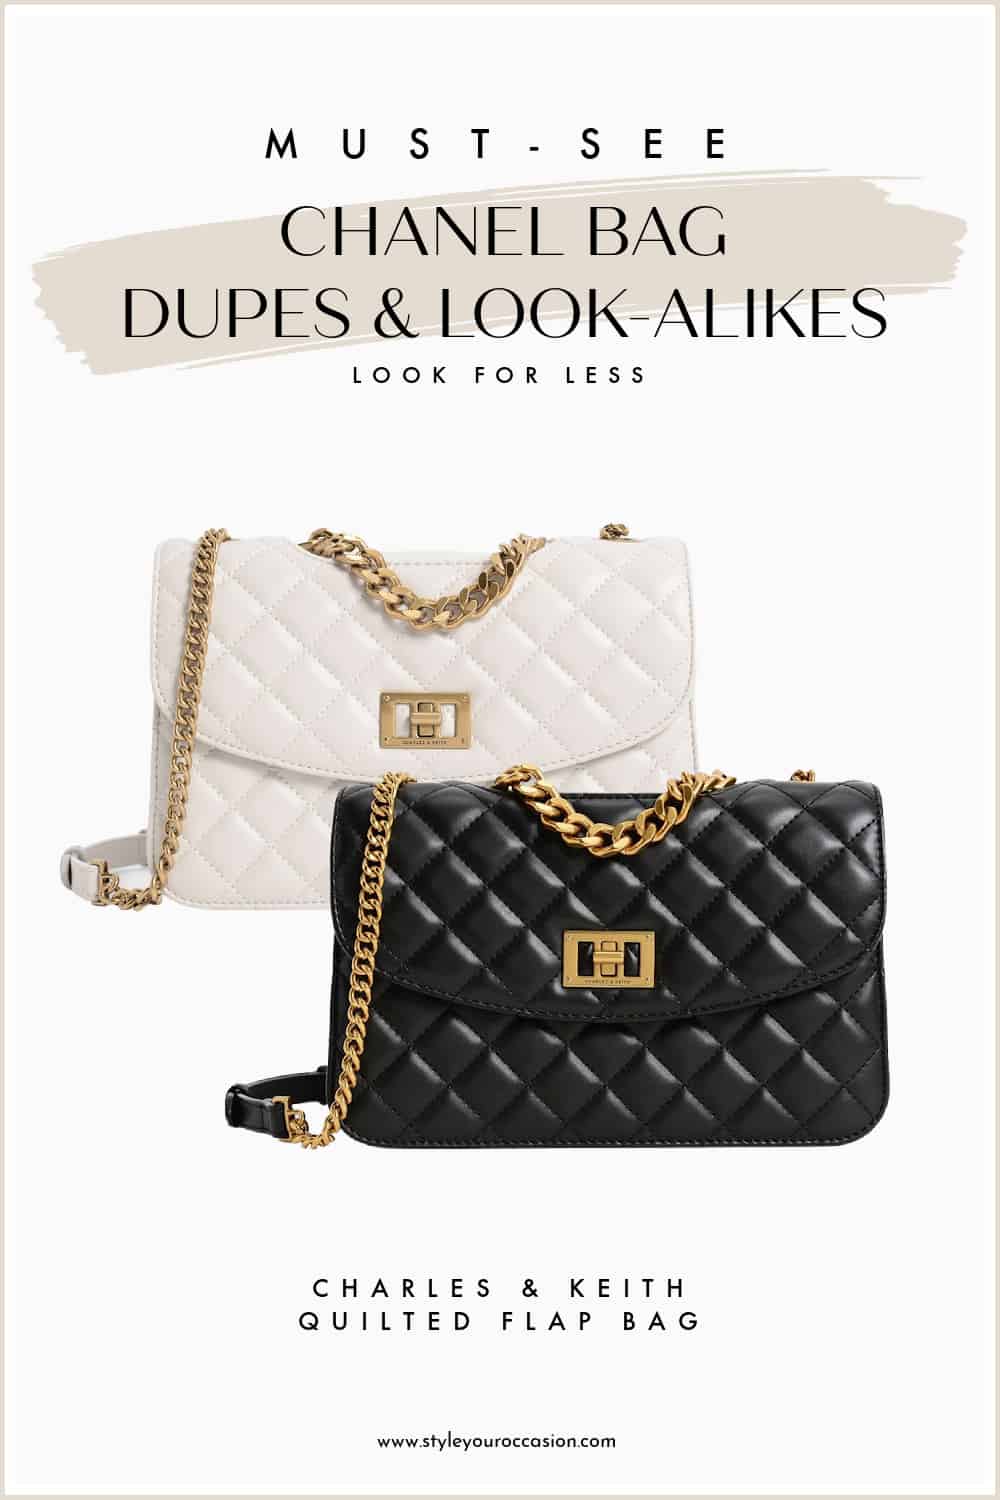 An image of a quilted Chanel bag dupe by Charles & Keith